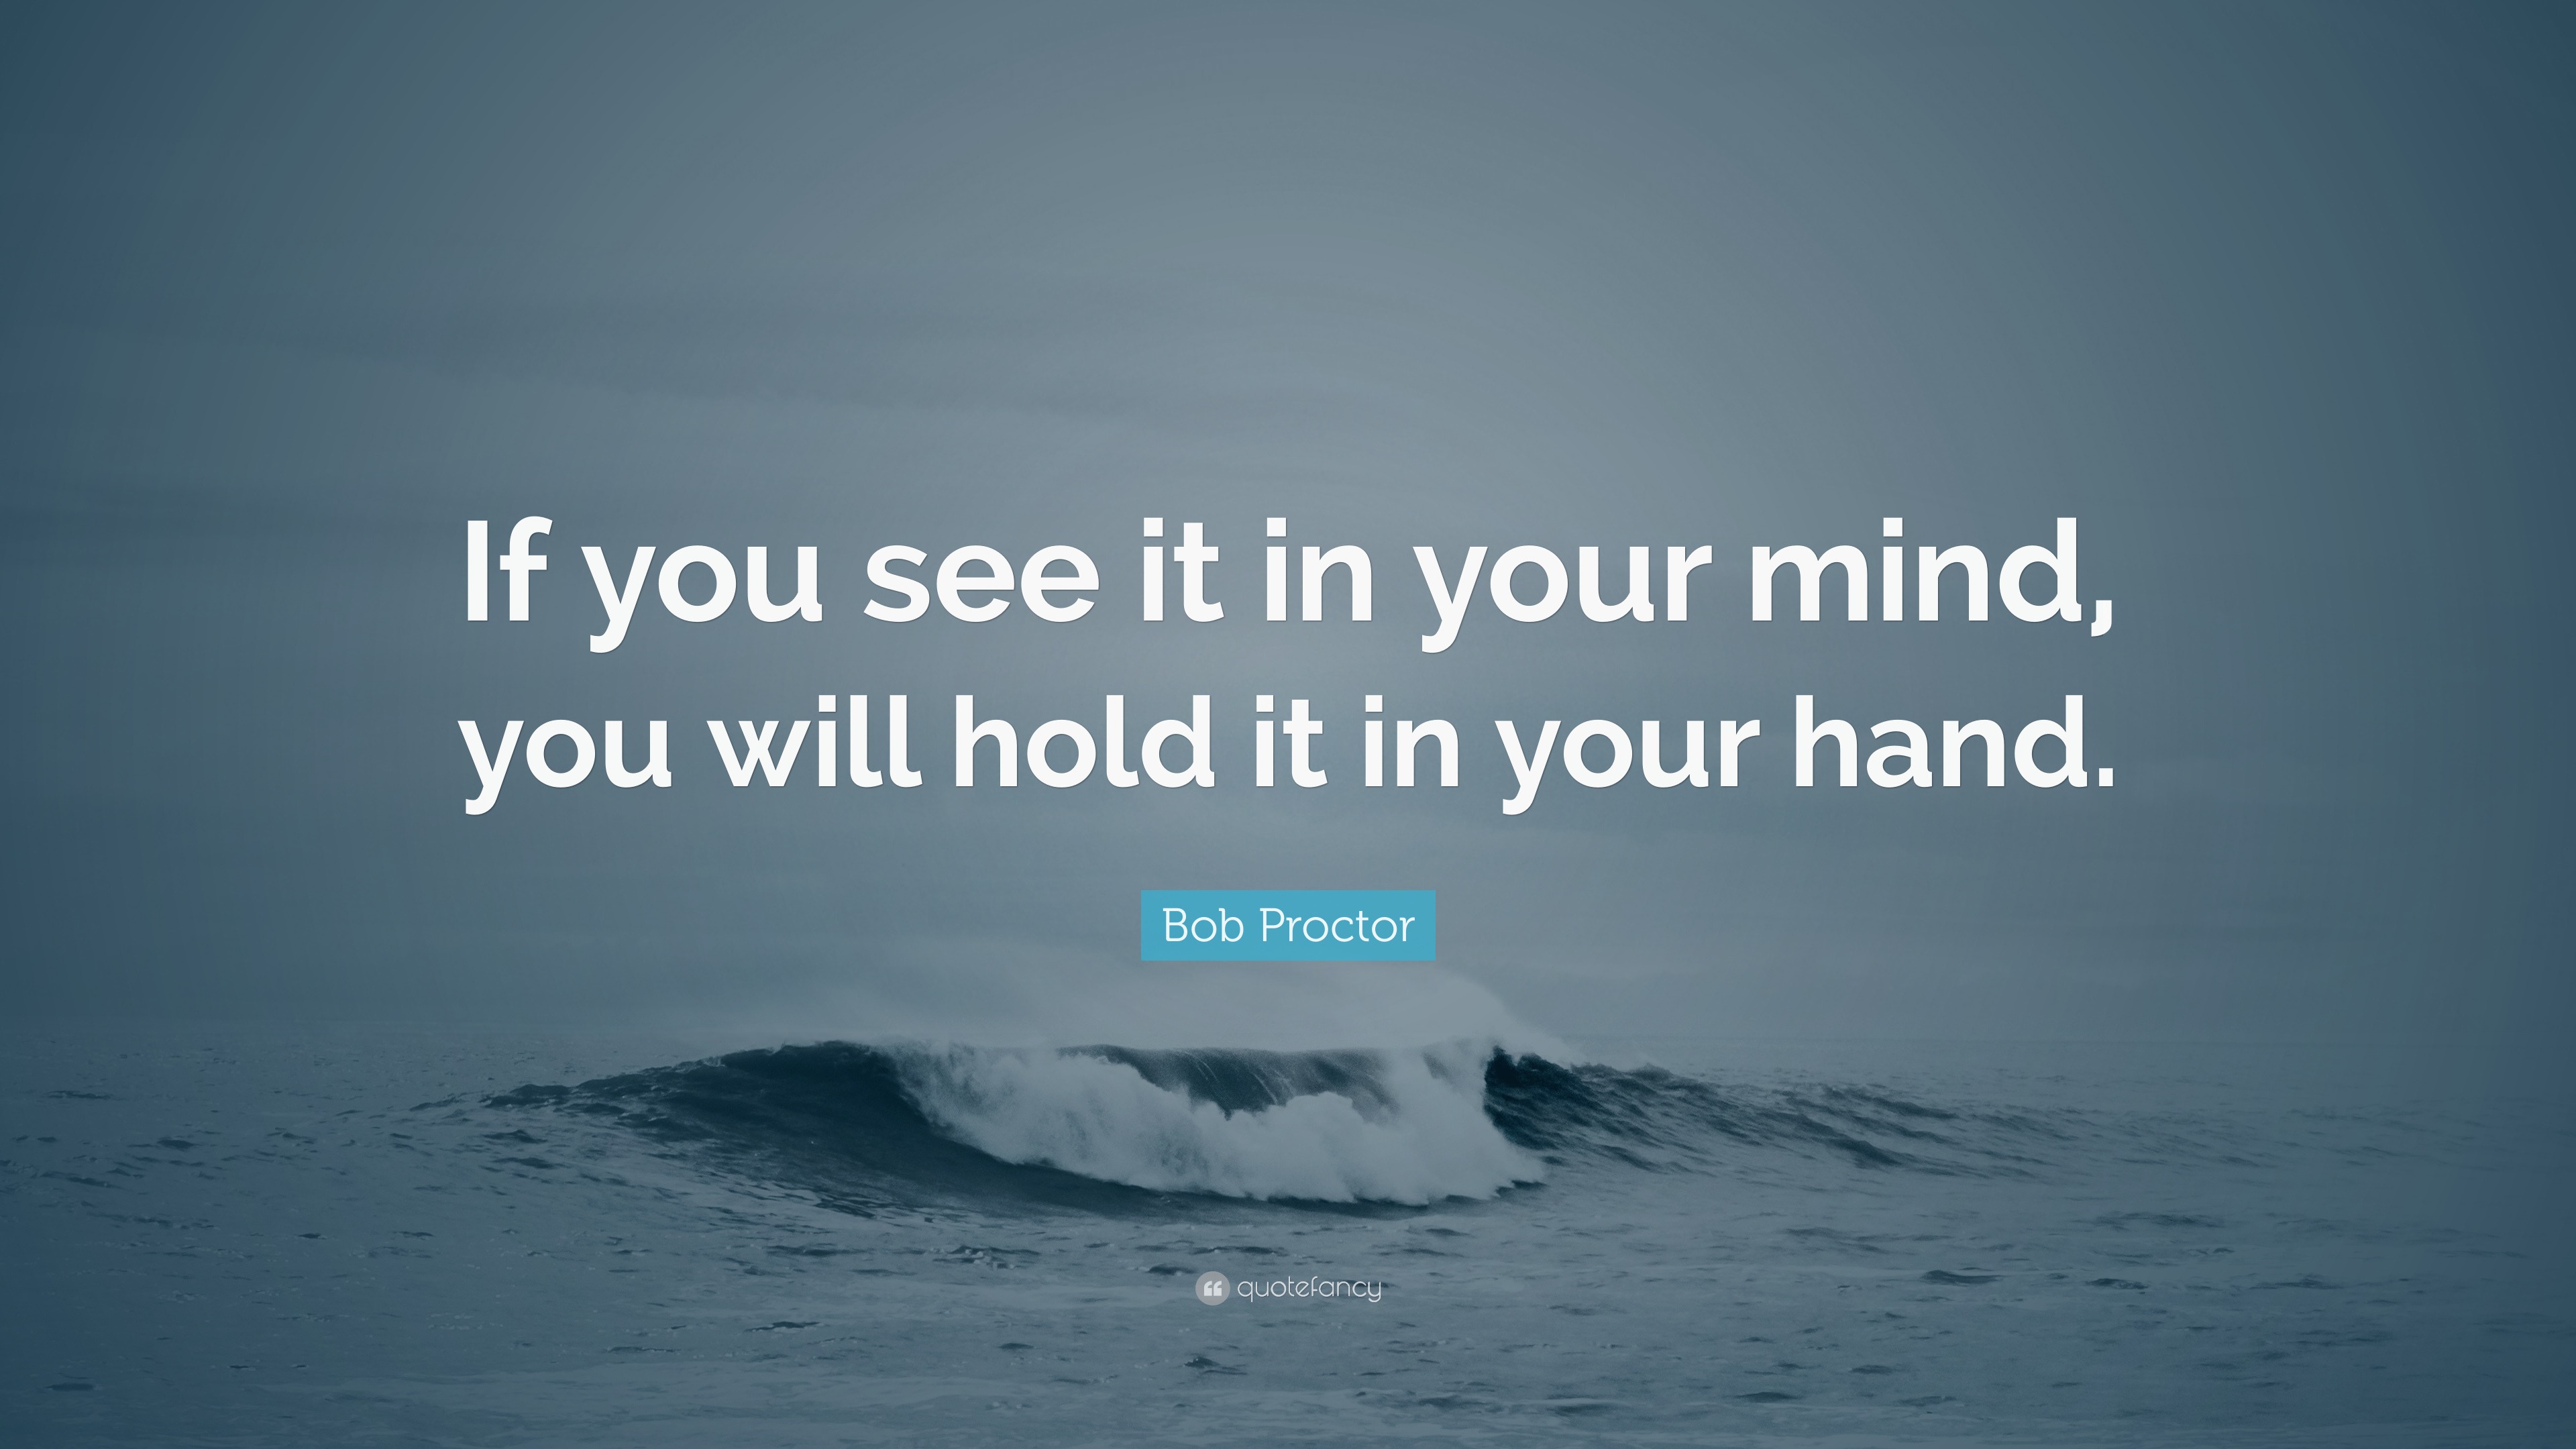 4681566 Bob Proctor Quote If you see it in your mind you will hold it in